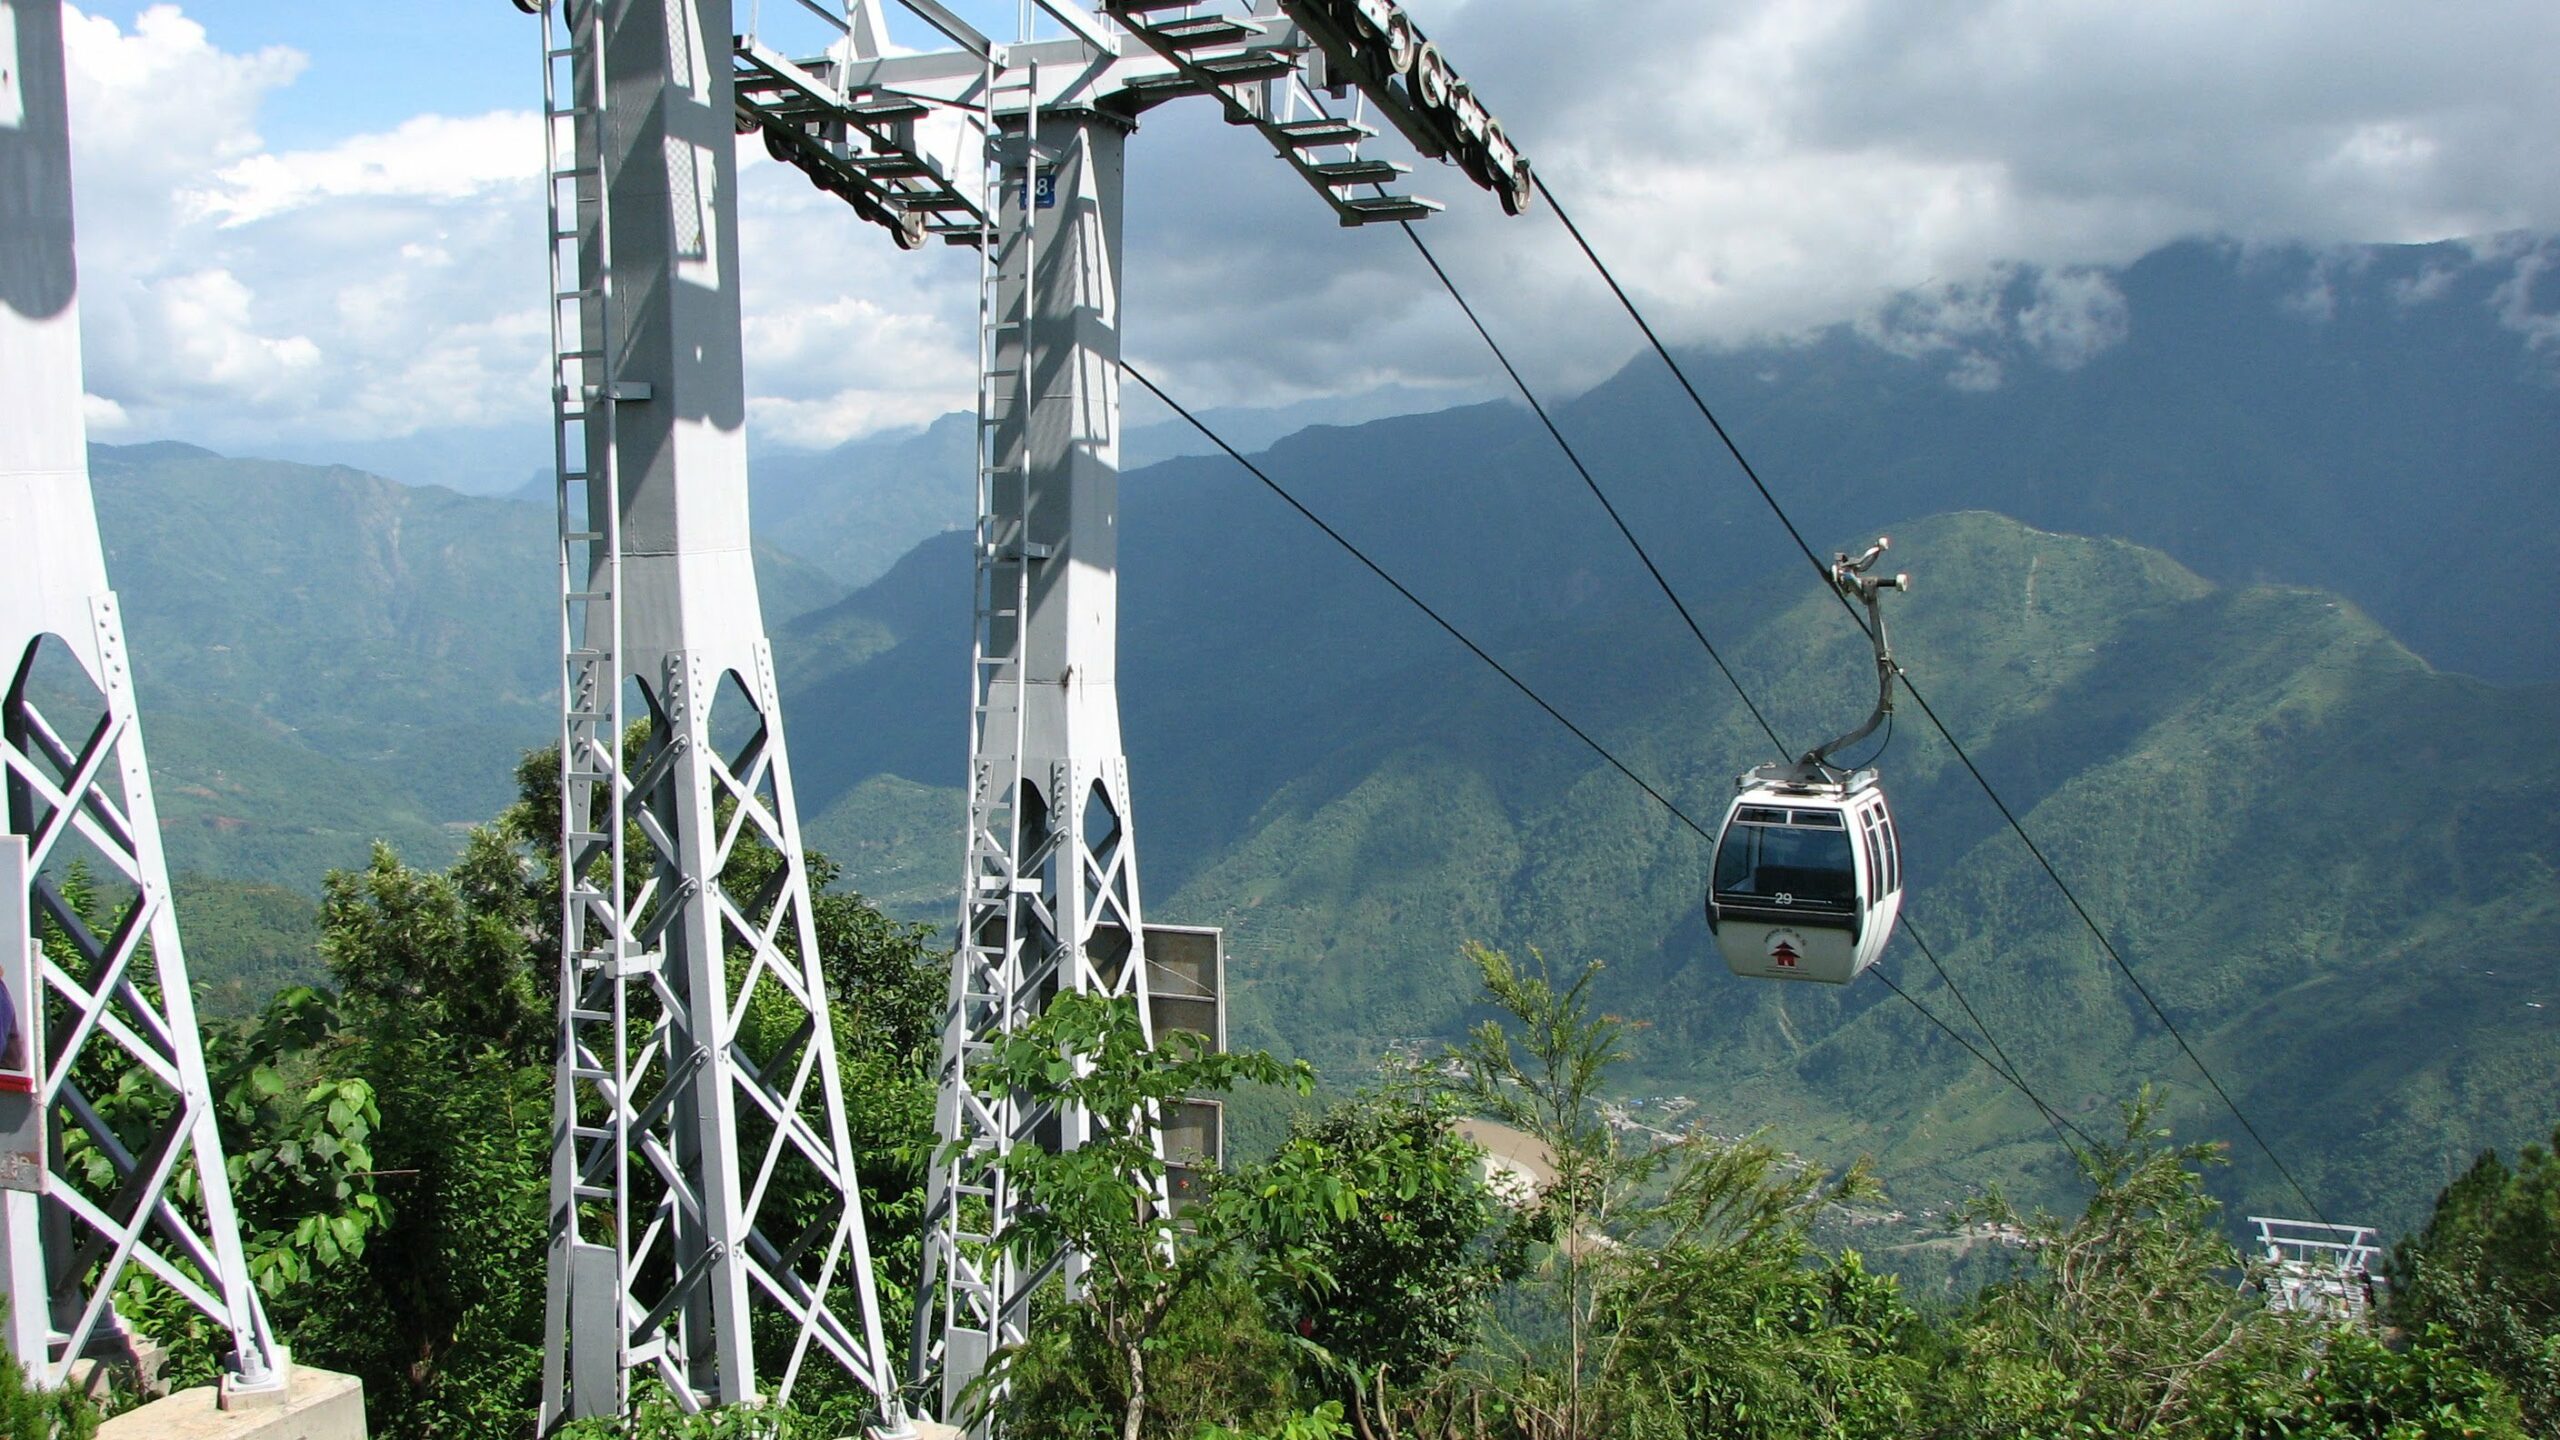 Manakamana Cable Car to shut down for 50 days